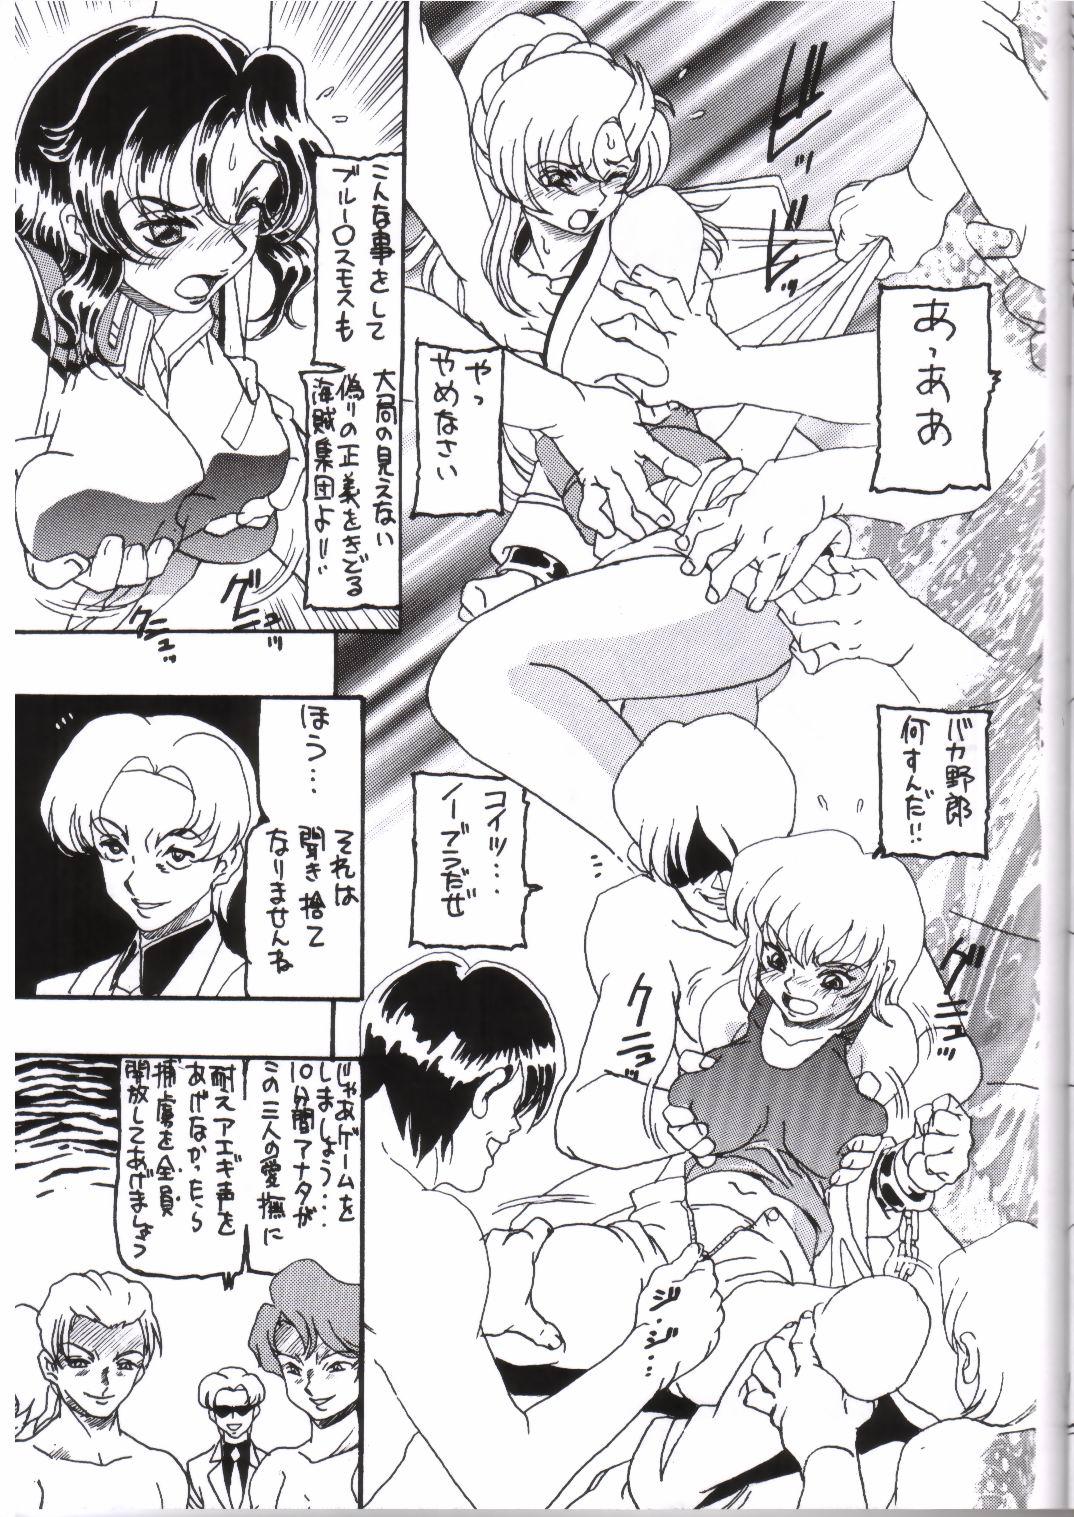 Oral Porn Moon Shine 9 - Gundam seed Her - Page 8